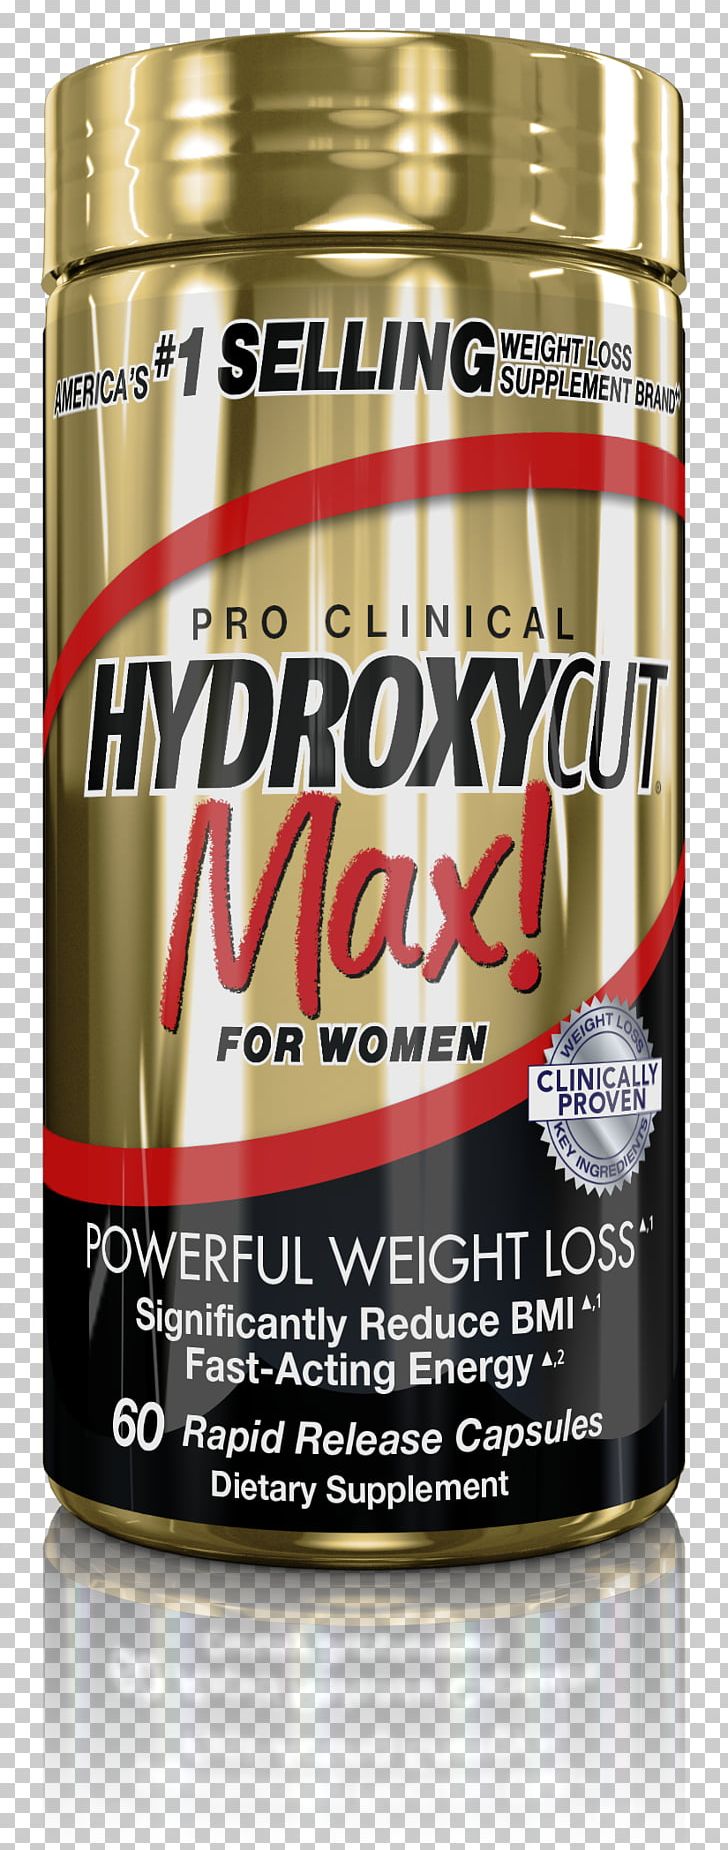 Dietary Supplement MuscleTech Hydroxycut MuscleTech Hydroxycut Weight Loss PNG, Clipart, Body Mass Index, Capsule, Clinic, Diet, Dietary Supplement Free PNG Download